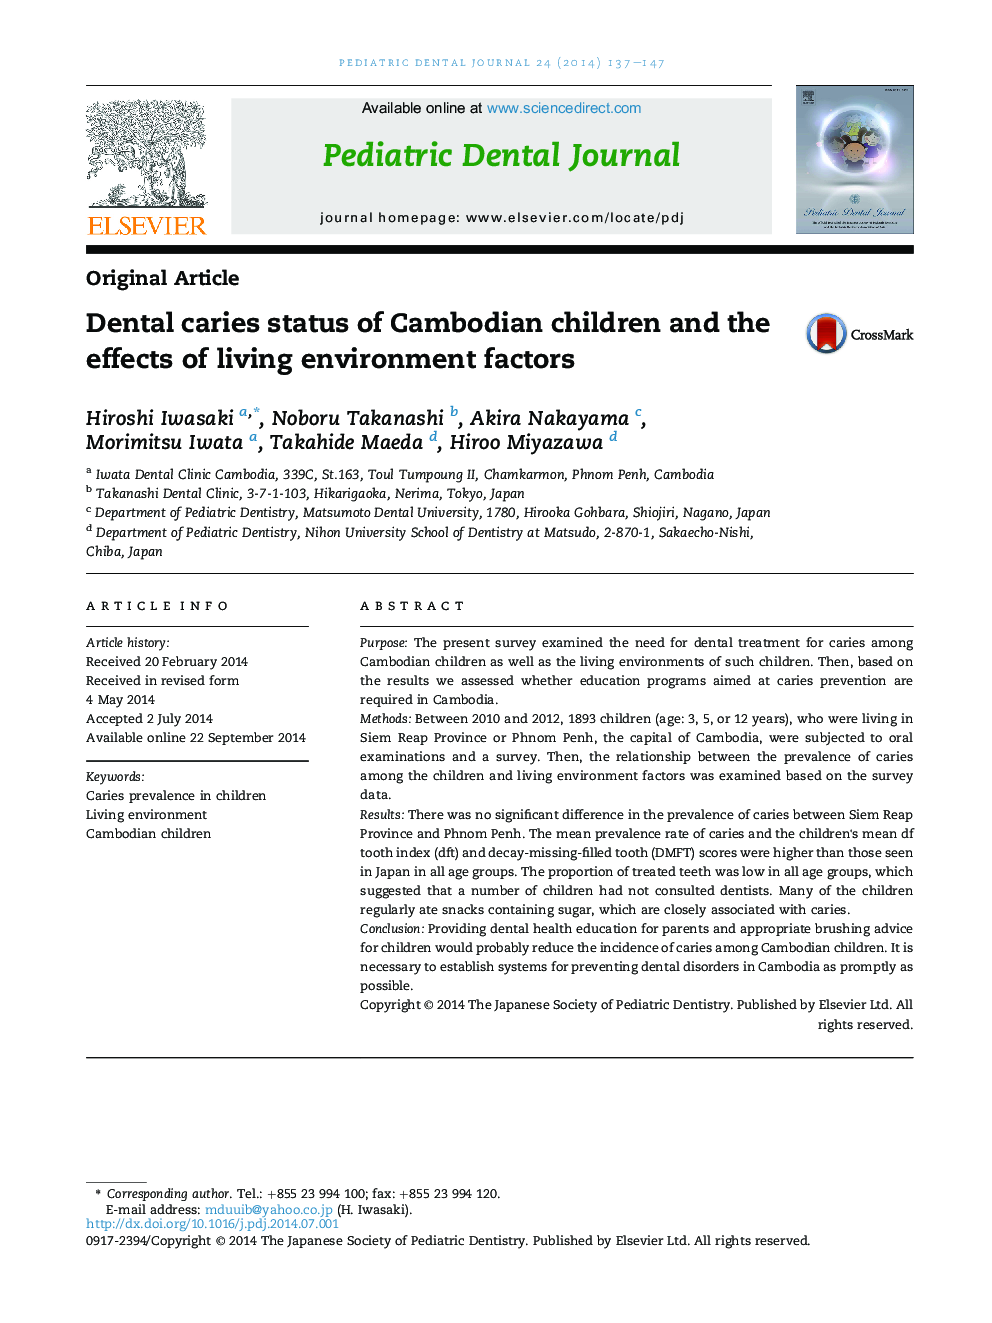 Dental caries status of Cambodian children and the effects of living environment factors